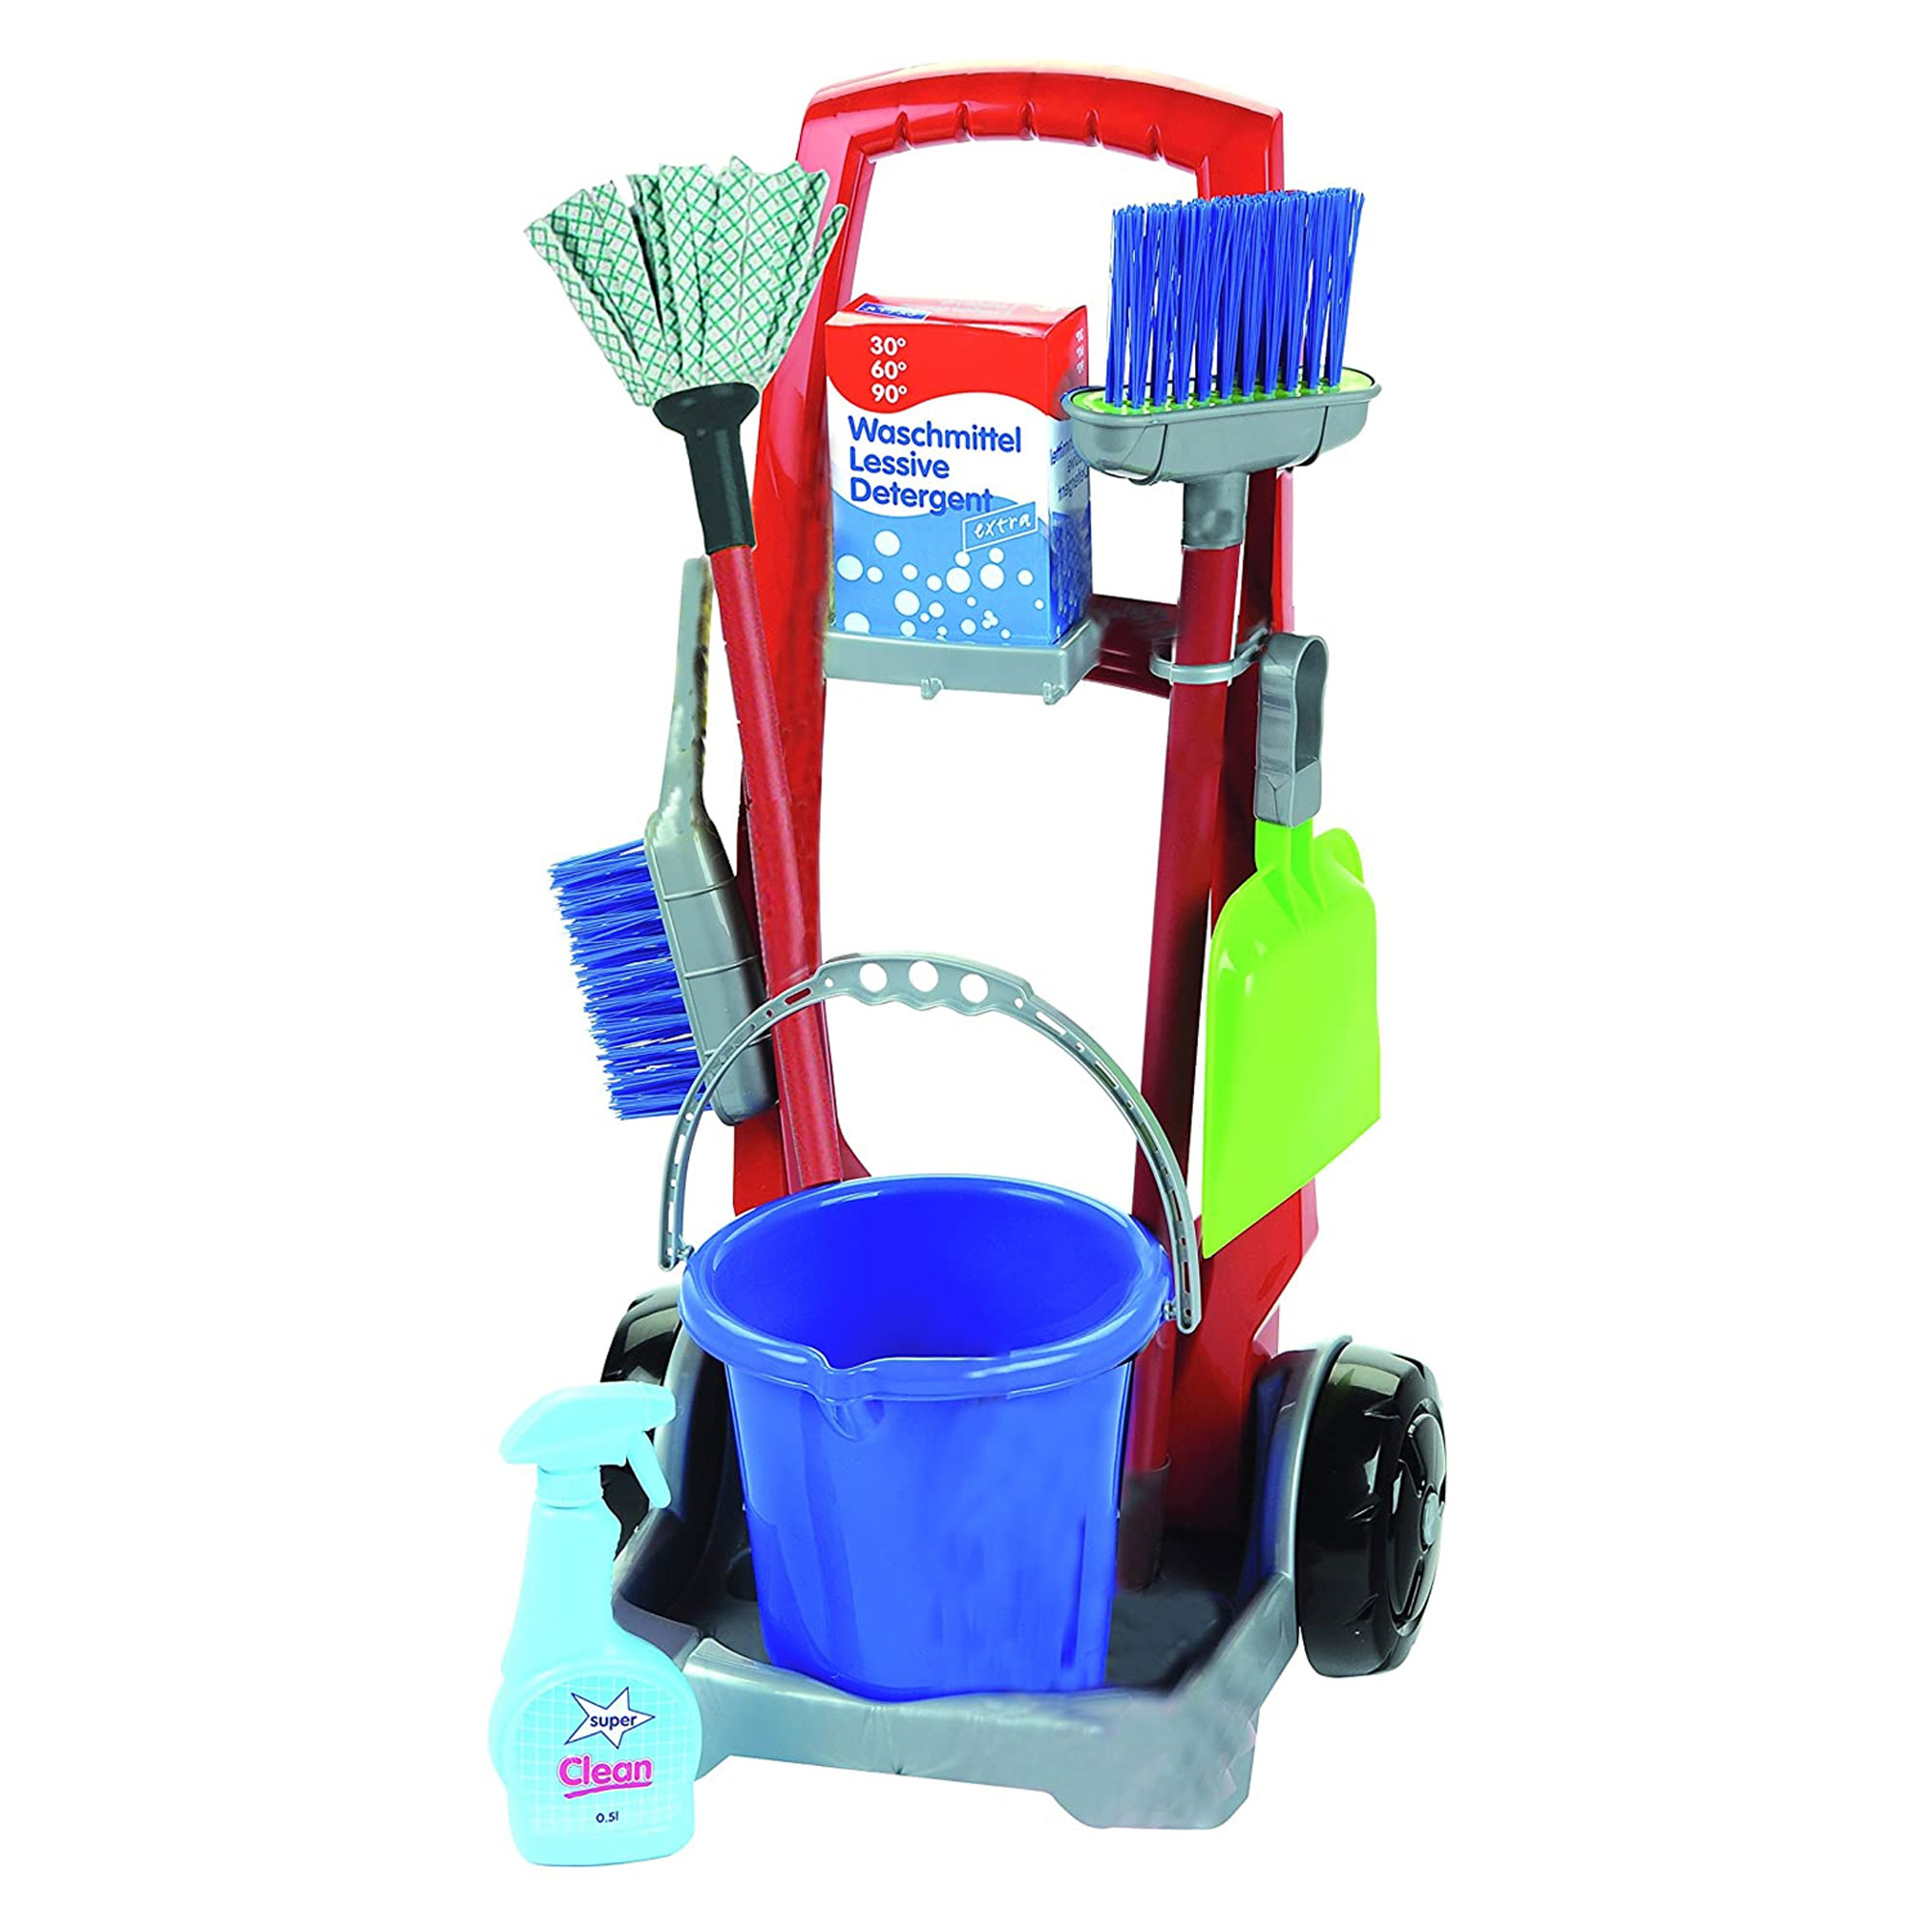 Theo Klein: Cleaning Trolley Set - Kid's 8 Piece Toy Set Includes: Trolley, Bucket, Mop, Broom, Dustpan w/ Brush, Bottle & Detergent Box, Kids Pretend Play, Ages 3+ - image 1 of 5